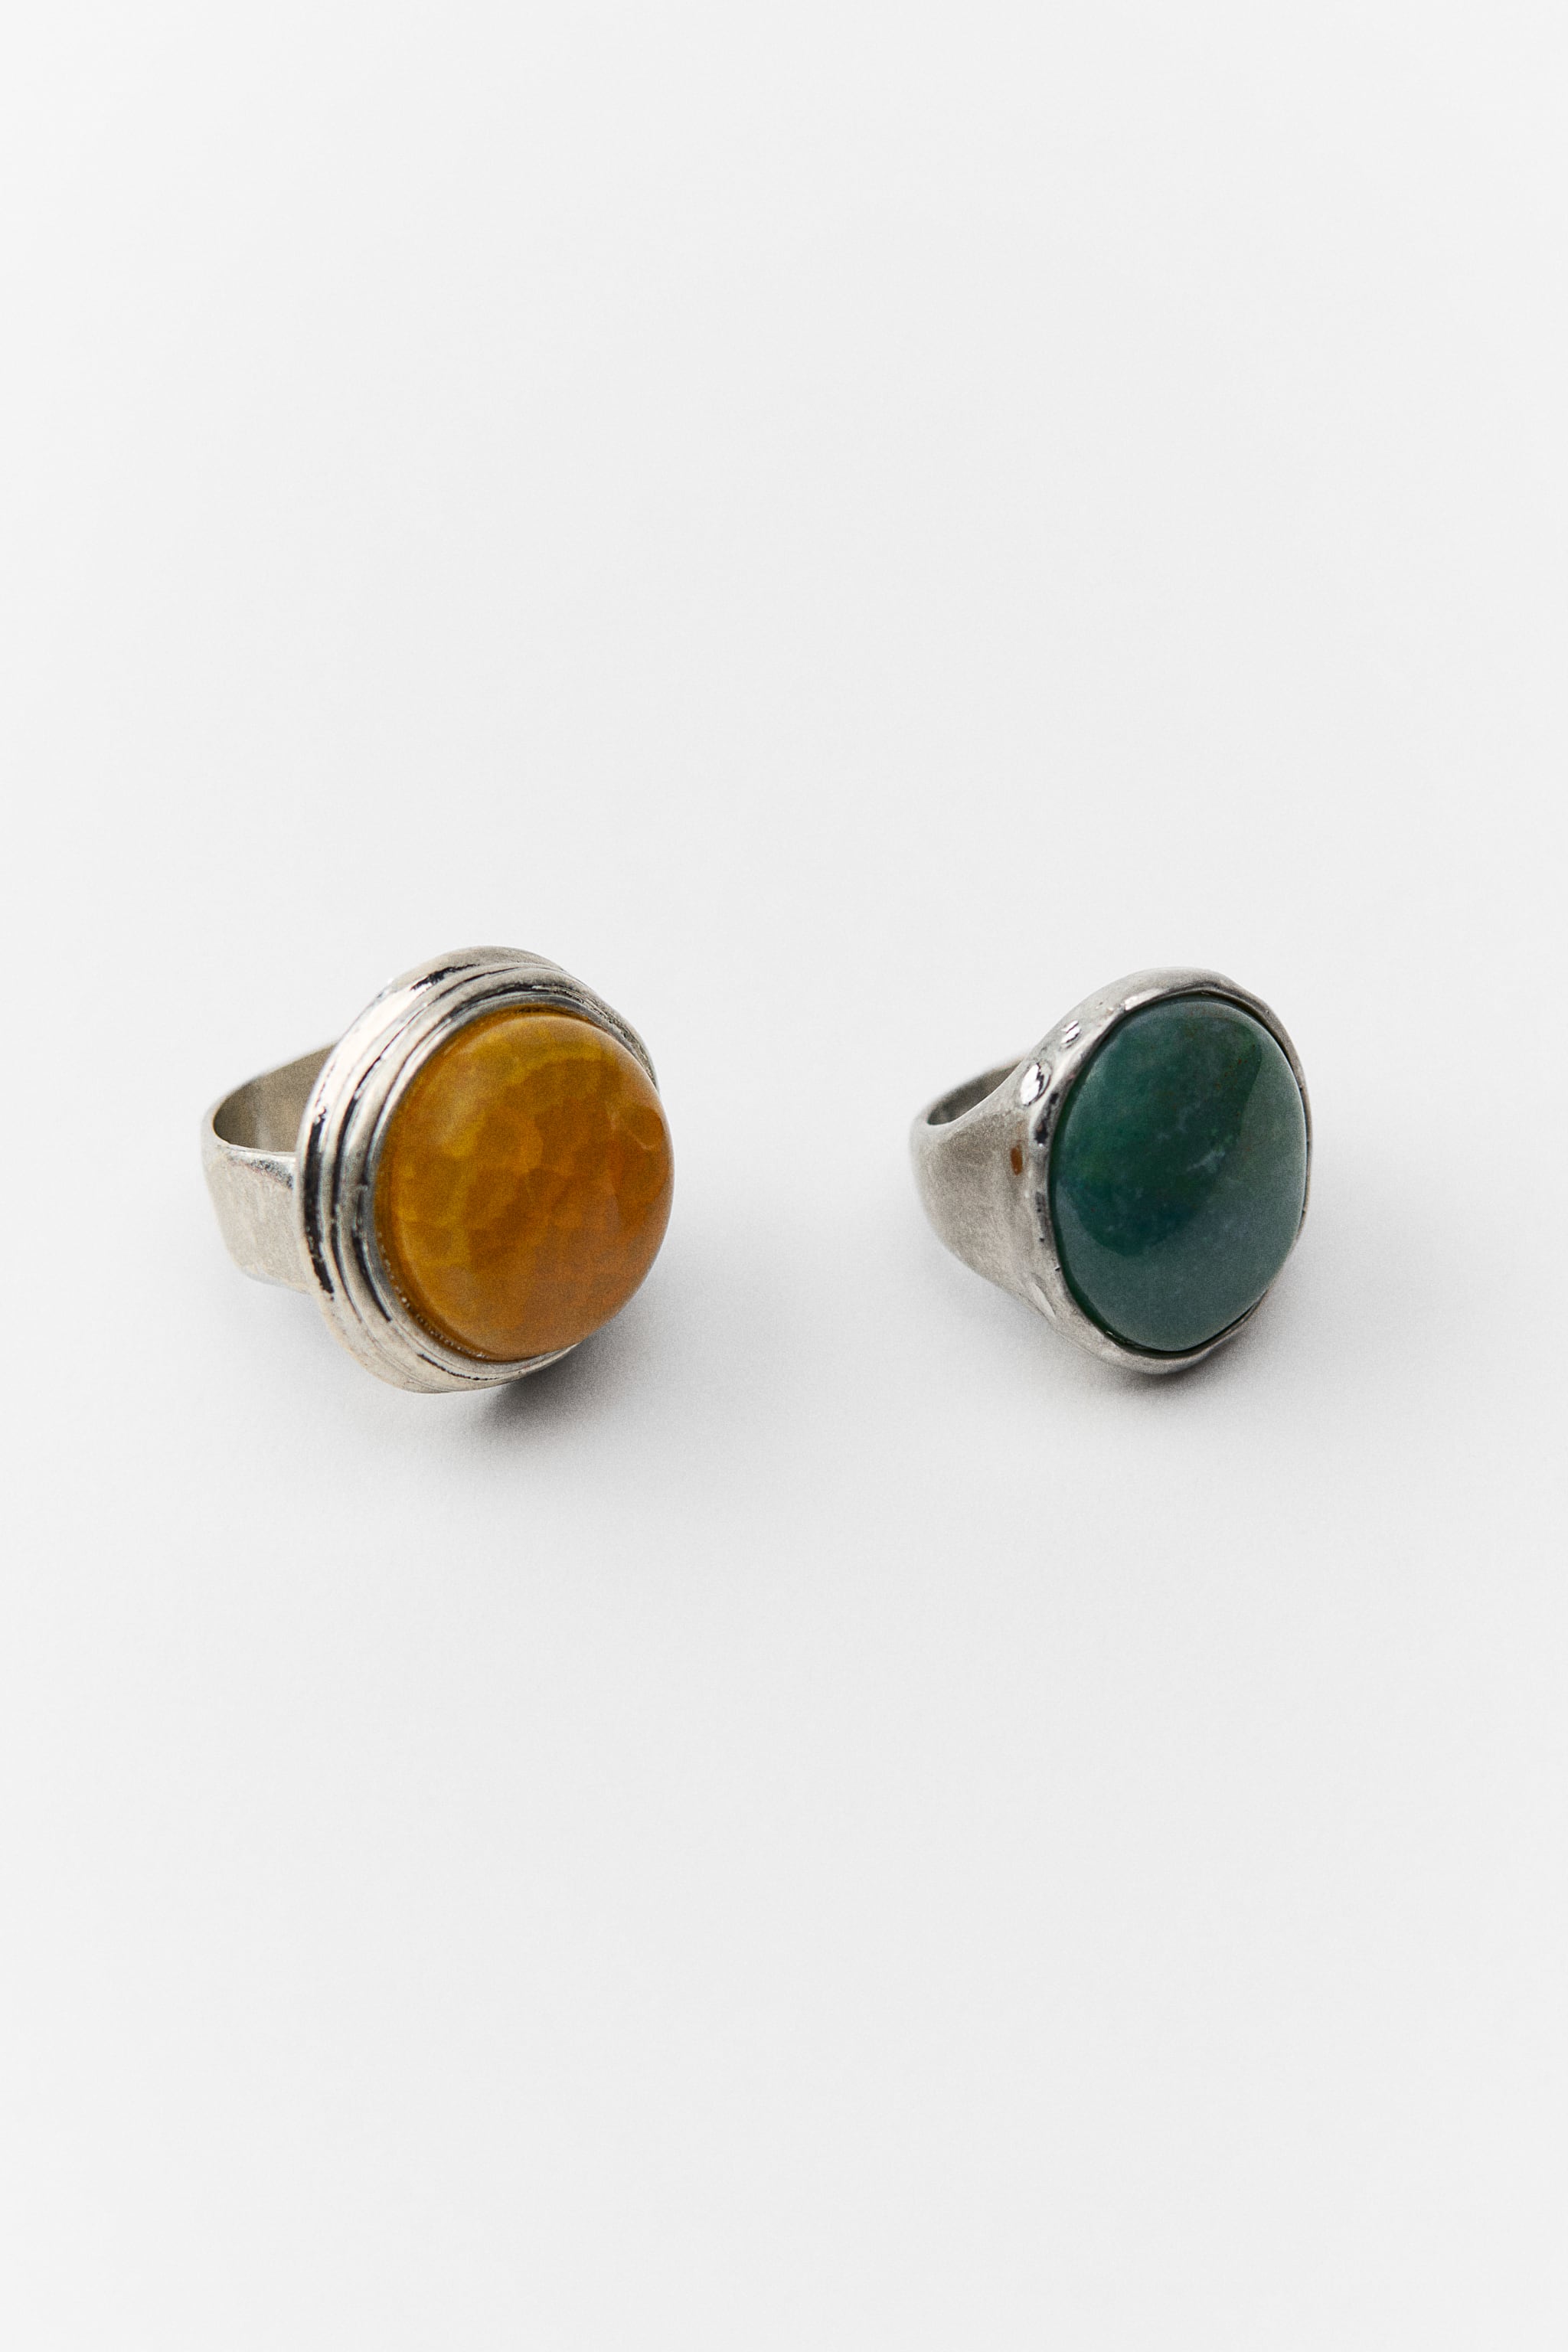 2 PACK OF STONE RINGS